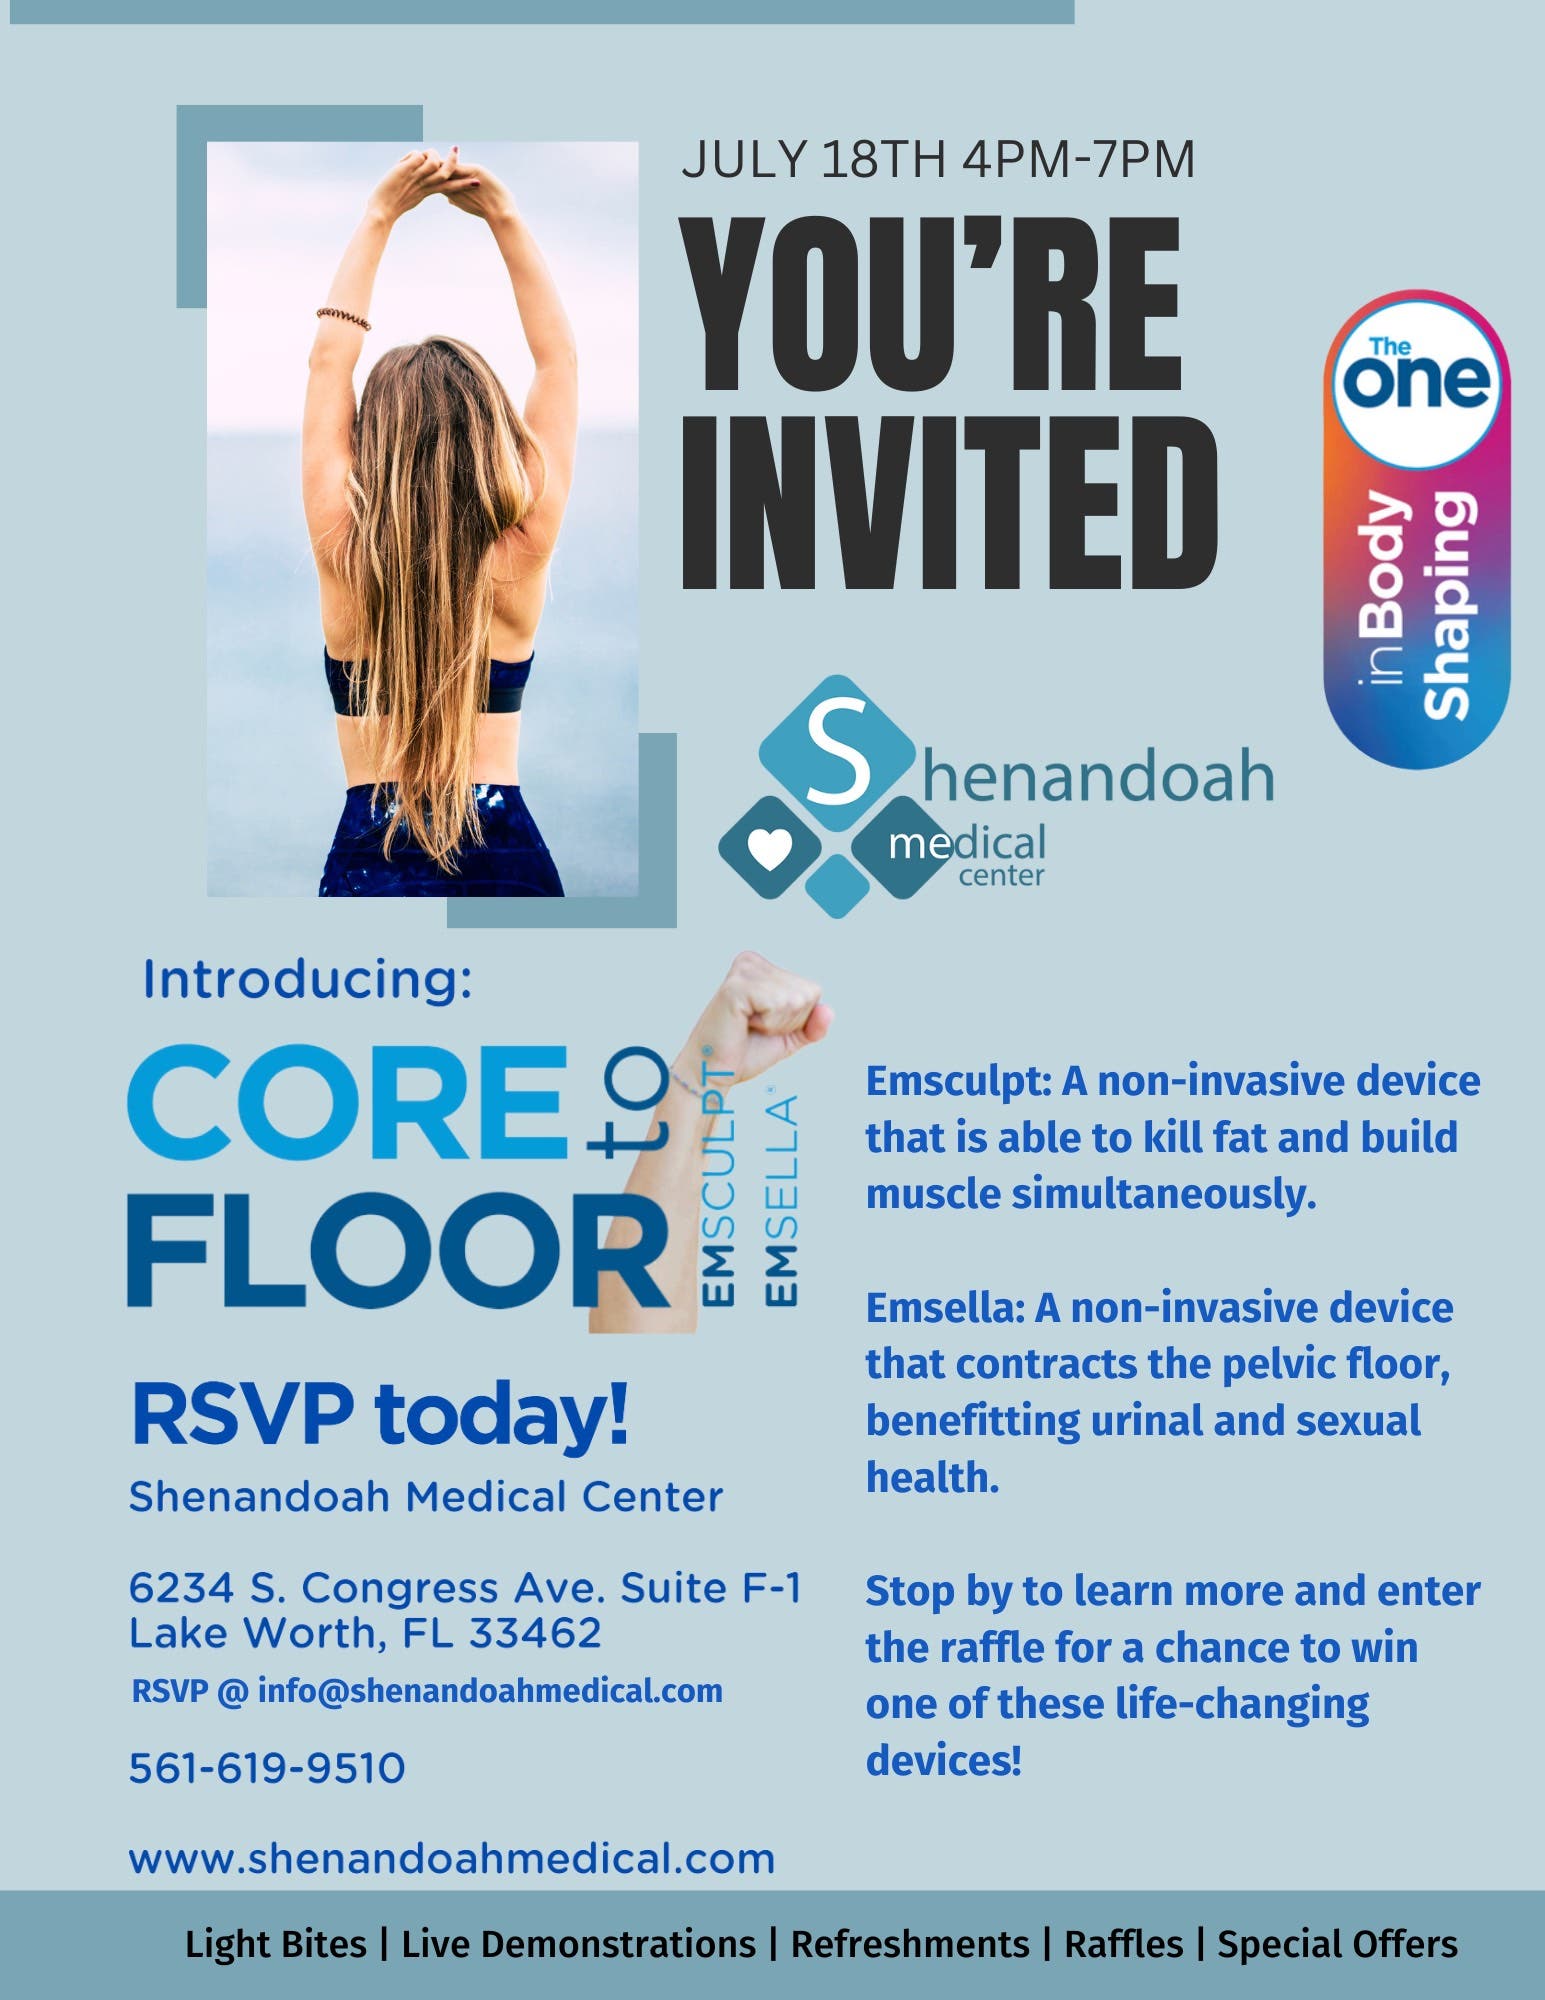  Shenandoah Medical Center Ribbon Cutting Open House featuring New EmSculpt Neo and EmSella Treatmen